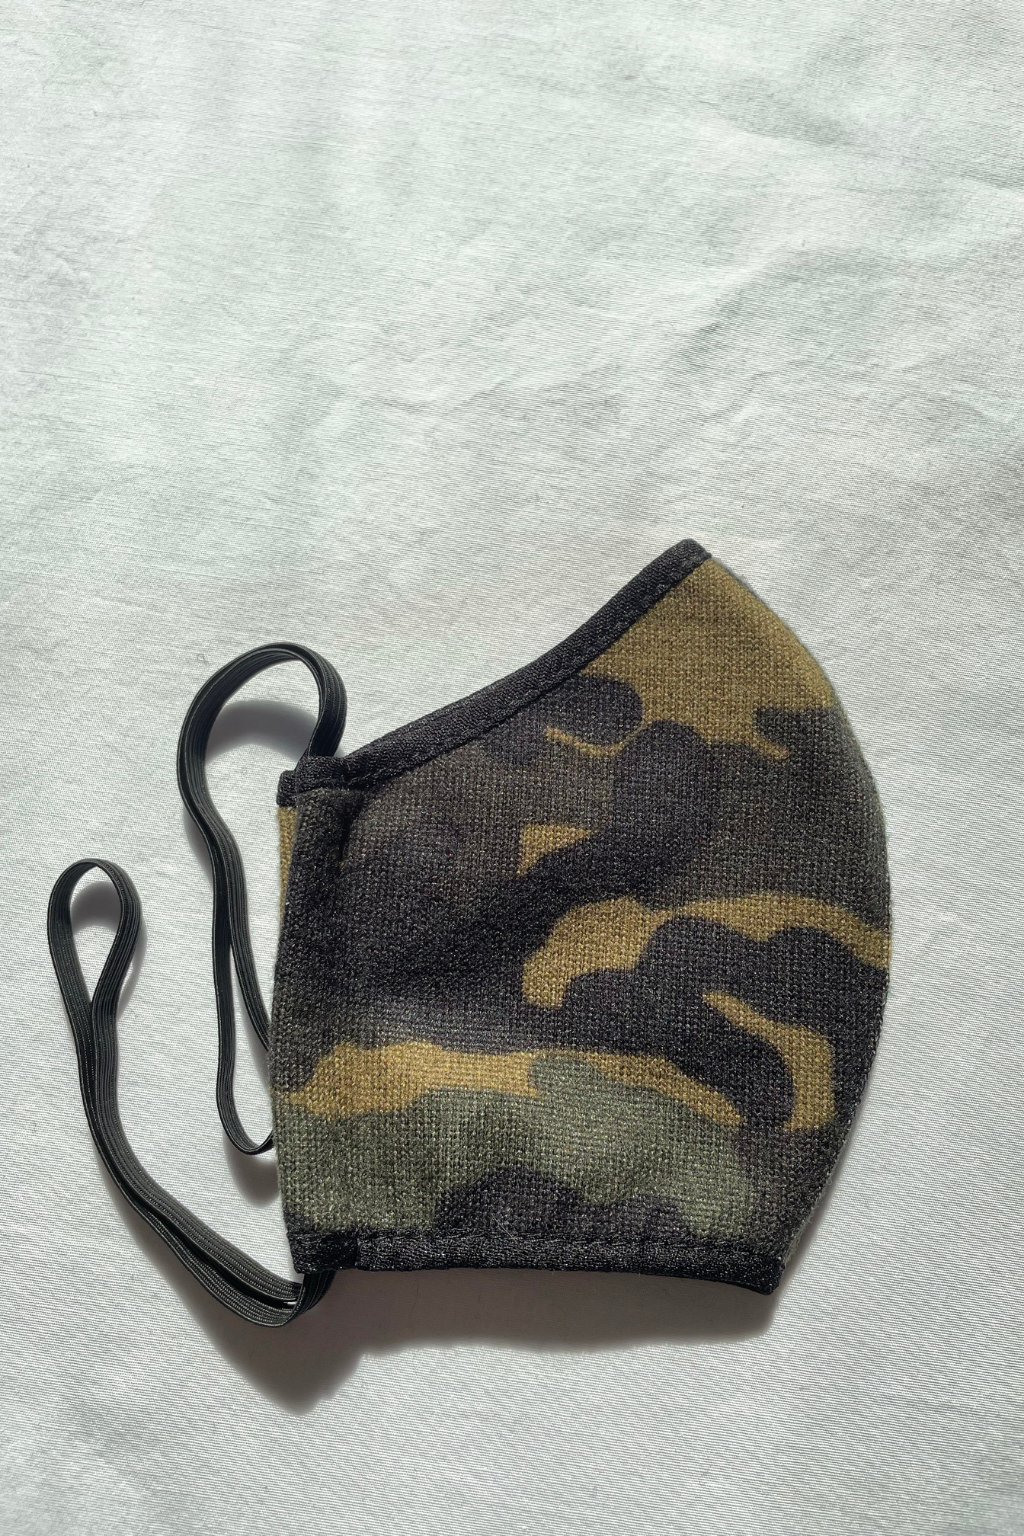 KOKOON Child Size Covid 19 Non Medical Reusable Cloth Masks in Brushed Sweater Knit Camo Print